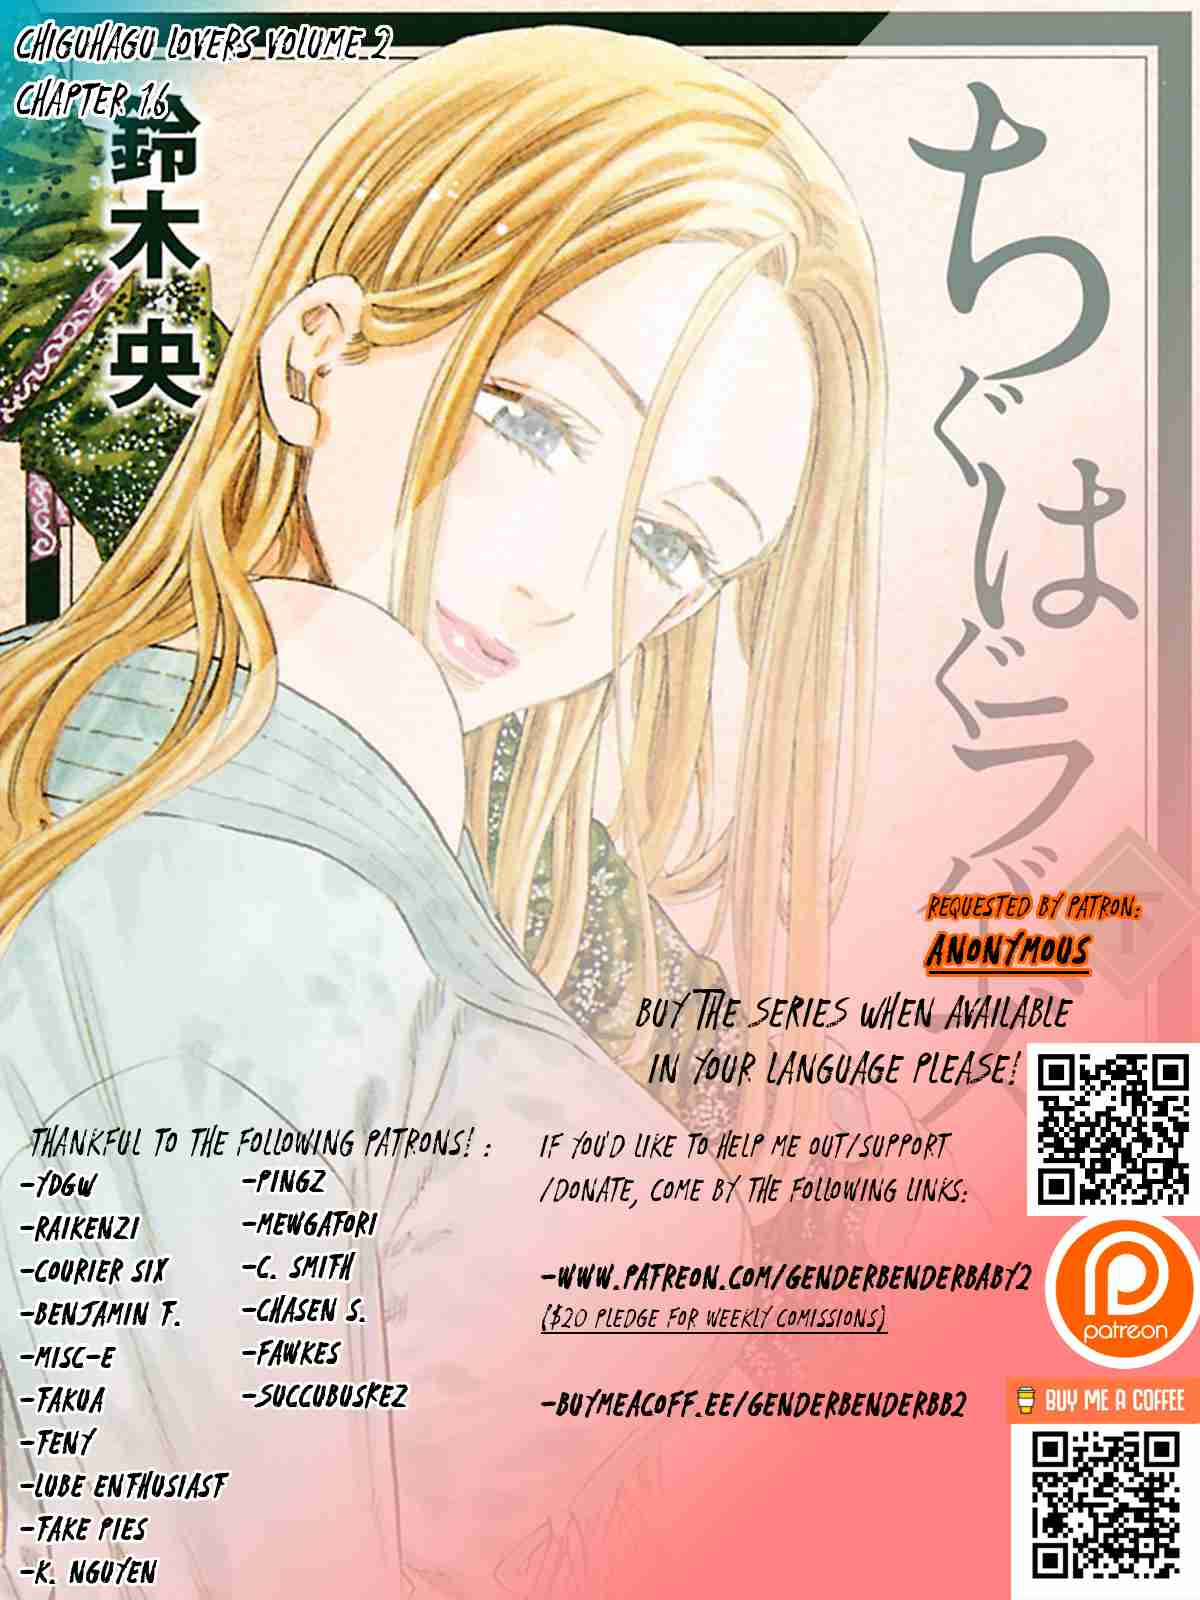 Chiguhagu Lovers Vol. 2 Ch. 16 Protect with my life roll